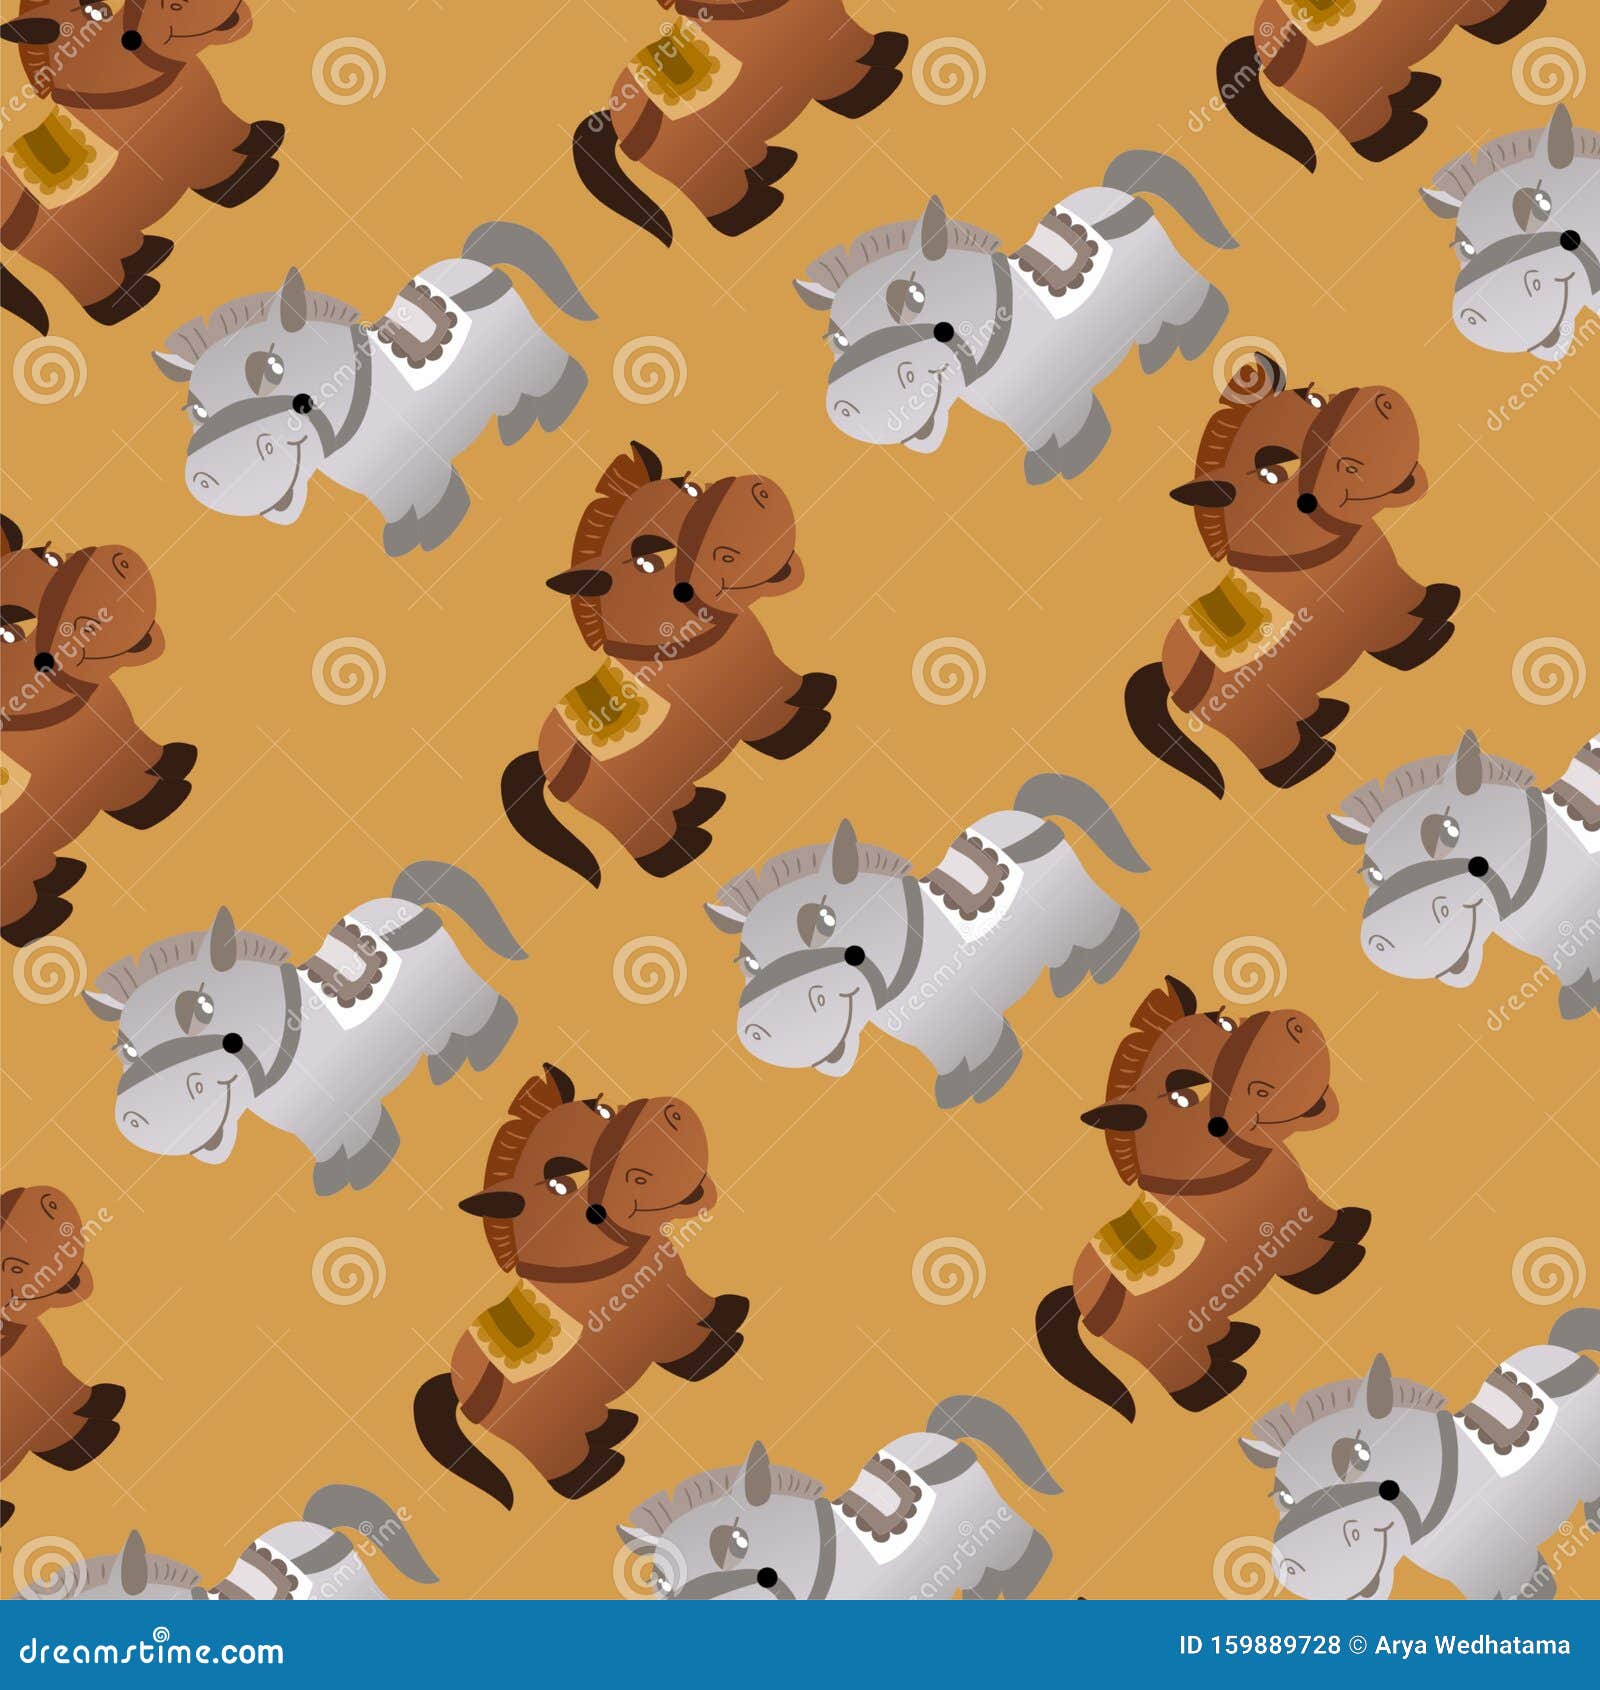 The Amazing of Cute Horse Cartoon Funny Character, Pattern Wallpaper in  Brown Background Stock Illustration - Illustration of background, flora:  159889728